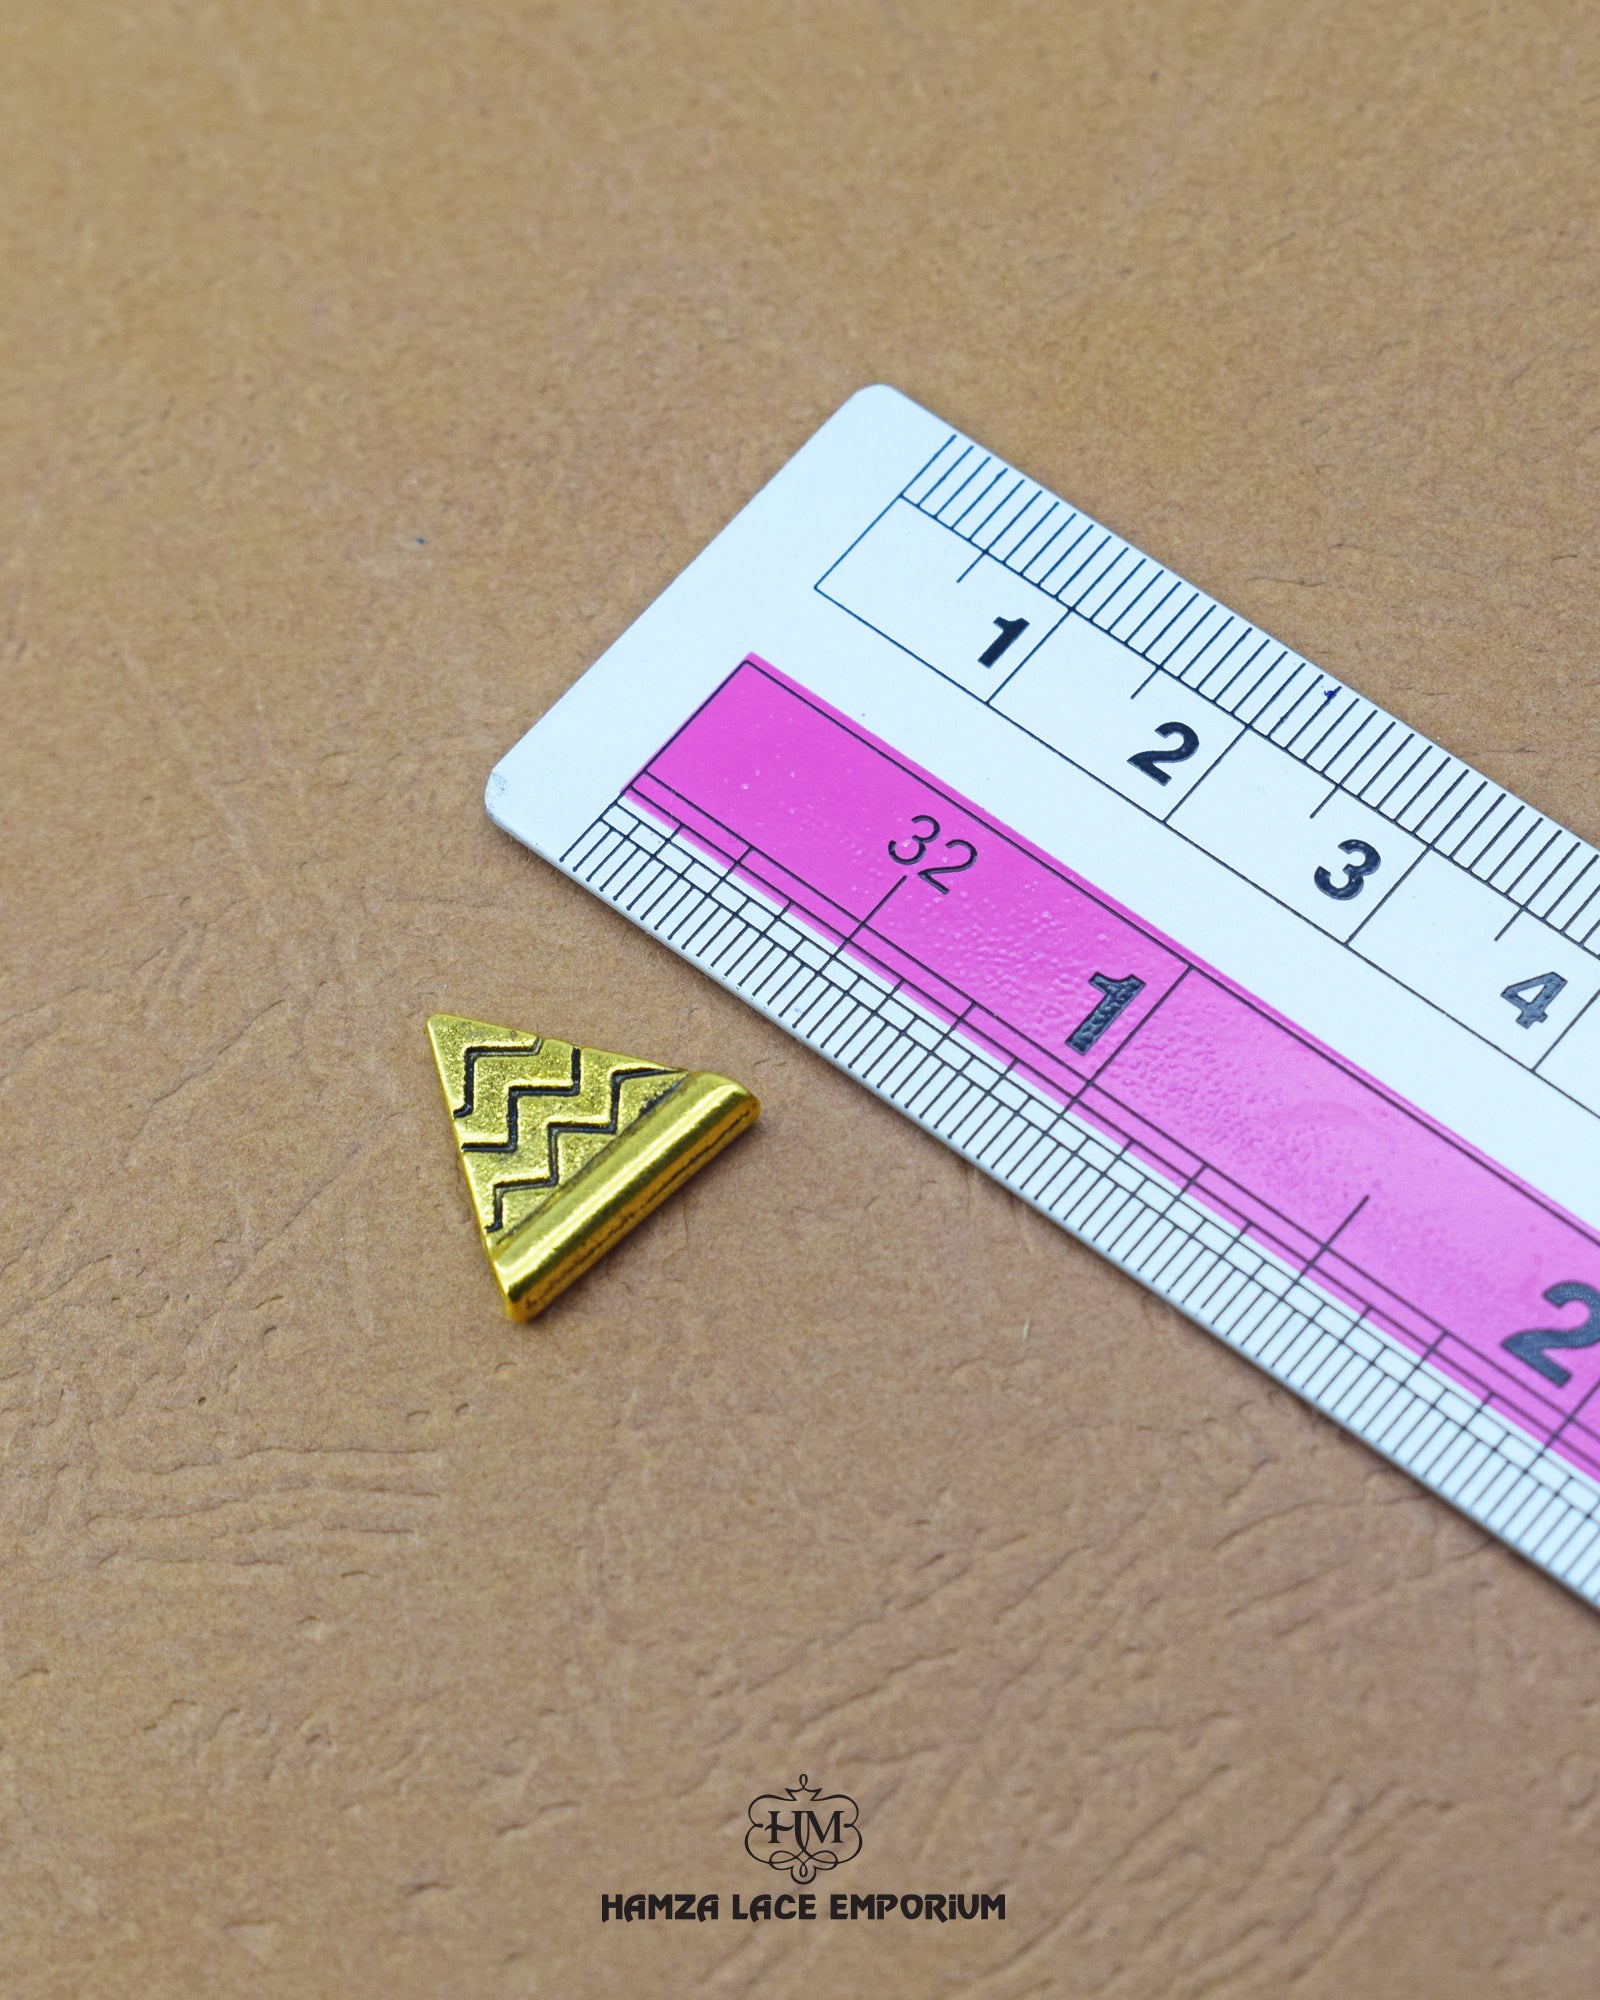 Elegant 'Triangle Design Button MA676' for Clothing (Size shown with ruler)